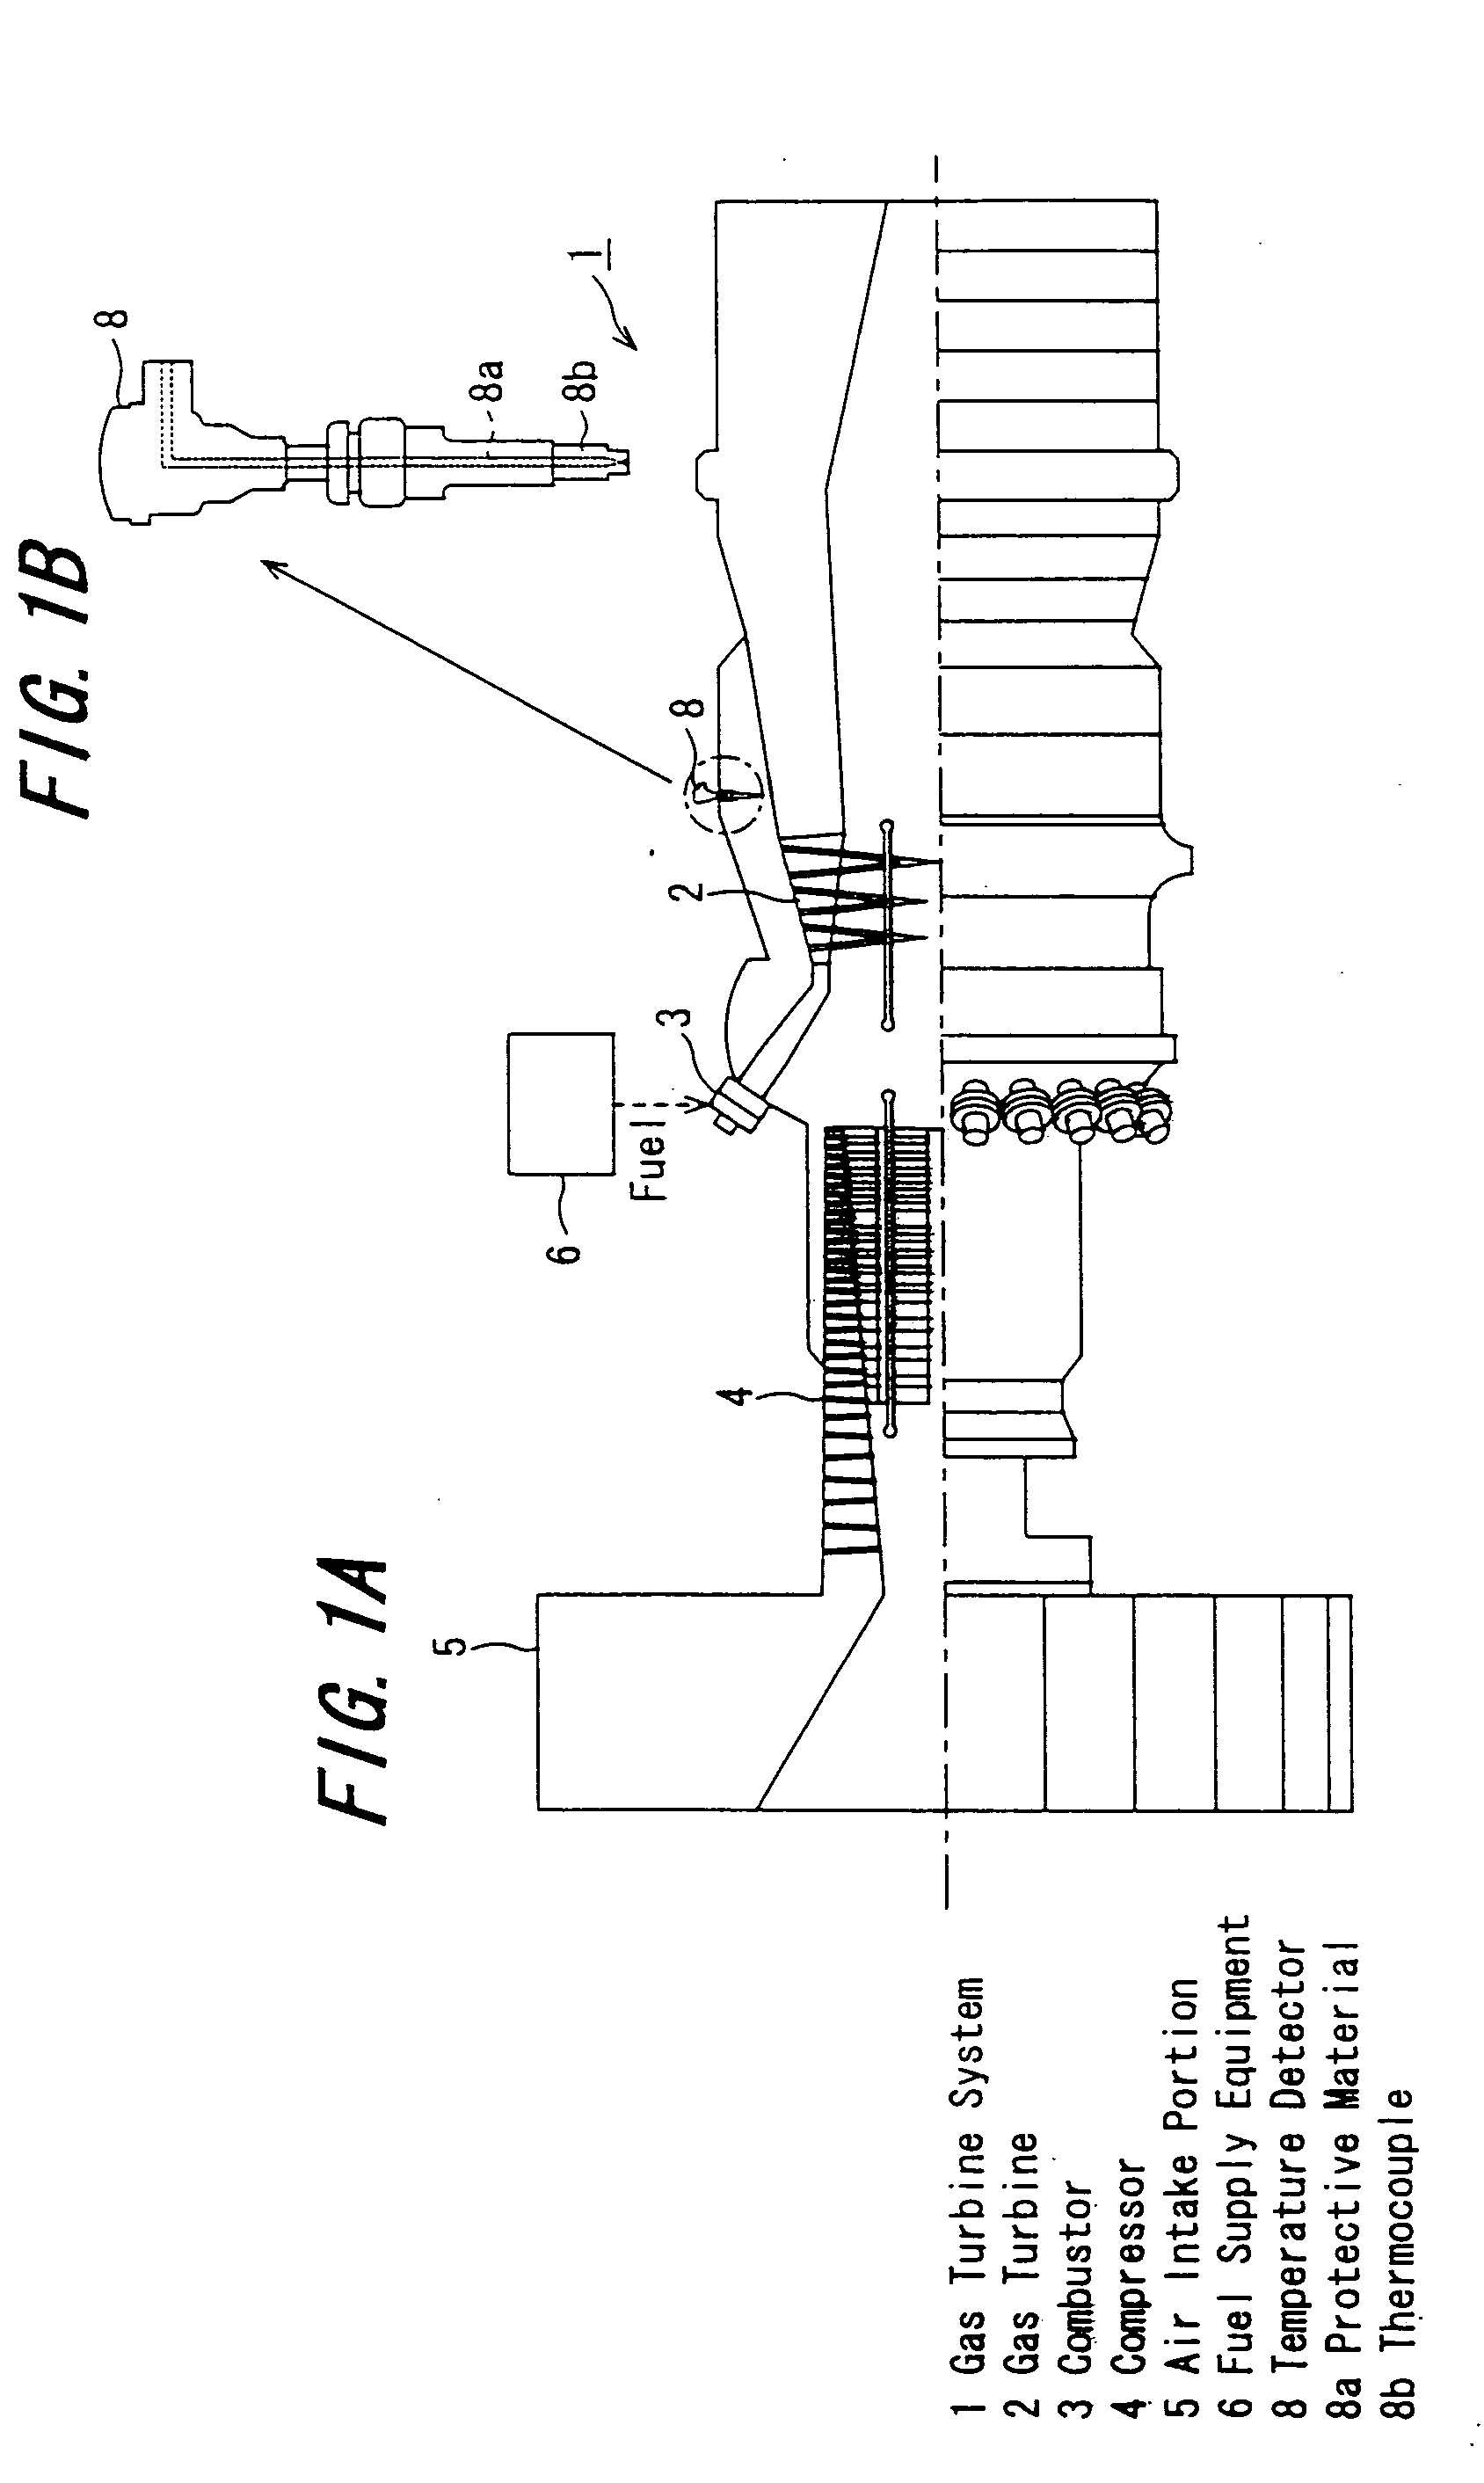 Combustion temperature high speed detection device